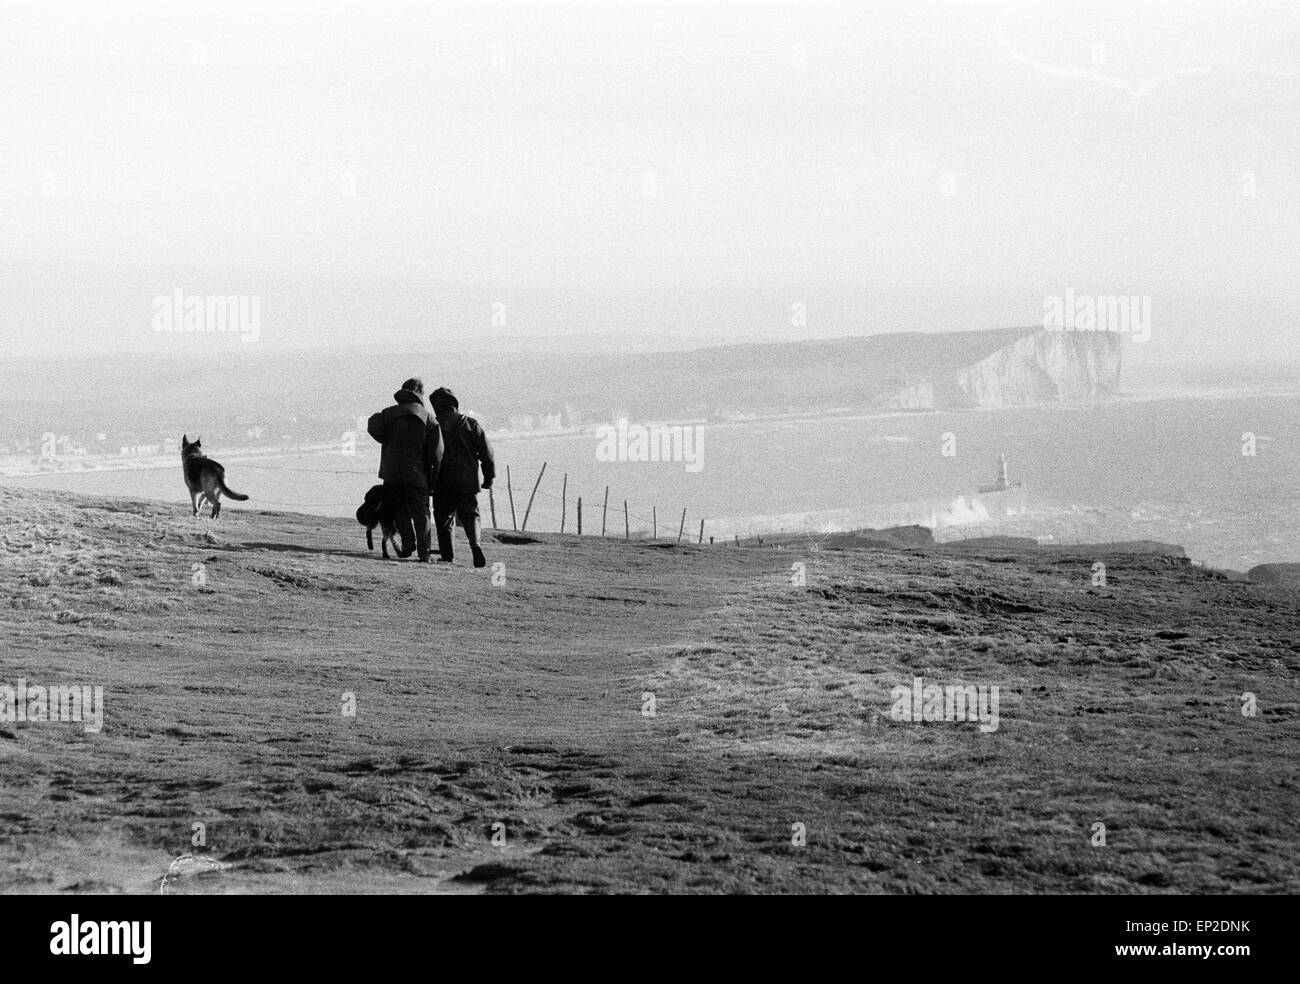 Police Manhunt in Newhaven Sussex 25th November 1974. Police with tracker dogs search cliff tops and harbour for missing Lord Lucan now wanted on murder charge. Richard John Bingham 7th Earl of Lucan popularly known as Lord Lucan was British peer who disappeared in the early hours of 8 November 1974 following the murder of Sandra Rivett his children's nanny the previous evening. There has been no verified sighting of him since then. On 19th June 1975 an inquest jury named Lucan as the murderer of Sandra Rivett. He was presumed deceased in chambers on 11th December 1992 & declared legally dead. Stock Photo